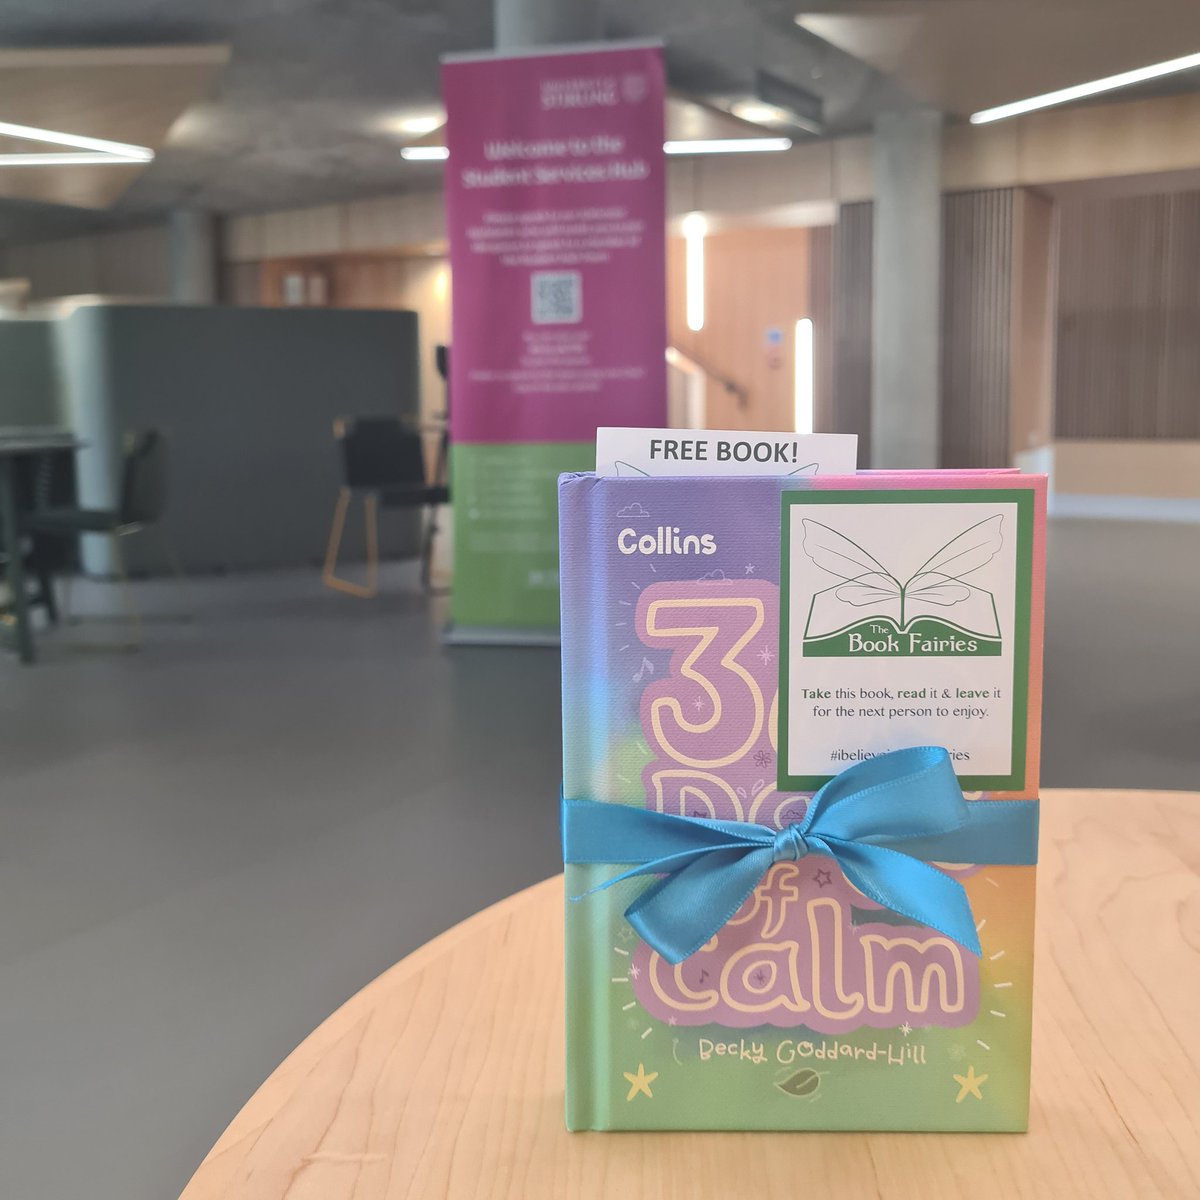 'Are you ready to feel calmer every day of the year?' Who will be lucky enough to find this copy of 365 Days of Calm hiding out at the @UofSStudentHub @StirUni. 
#IBelieveInBookFairies #TBF365Days #BeckyGoddardHill #TBFCollins #Collins4Parents #EmotionallyHealthyKids #365Days